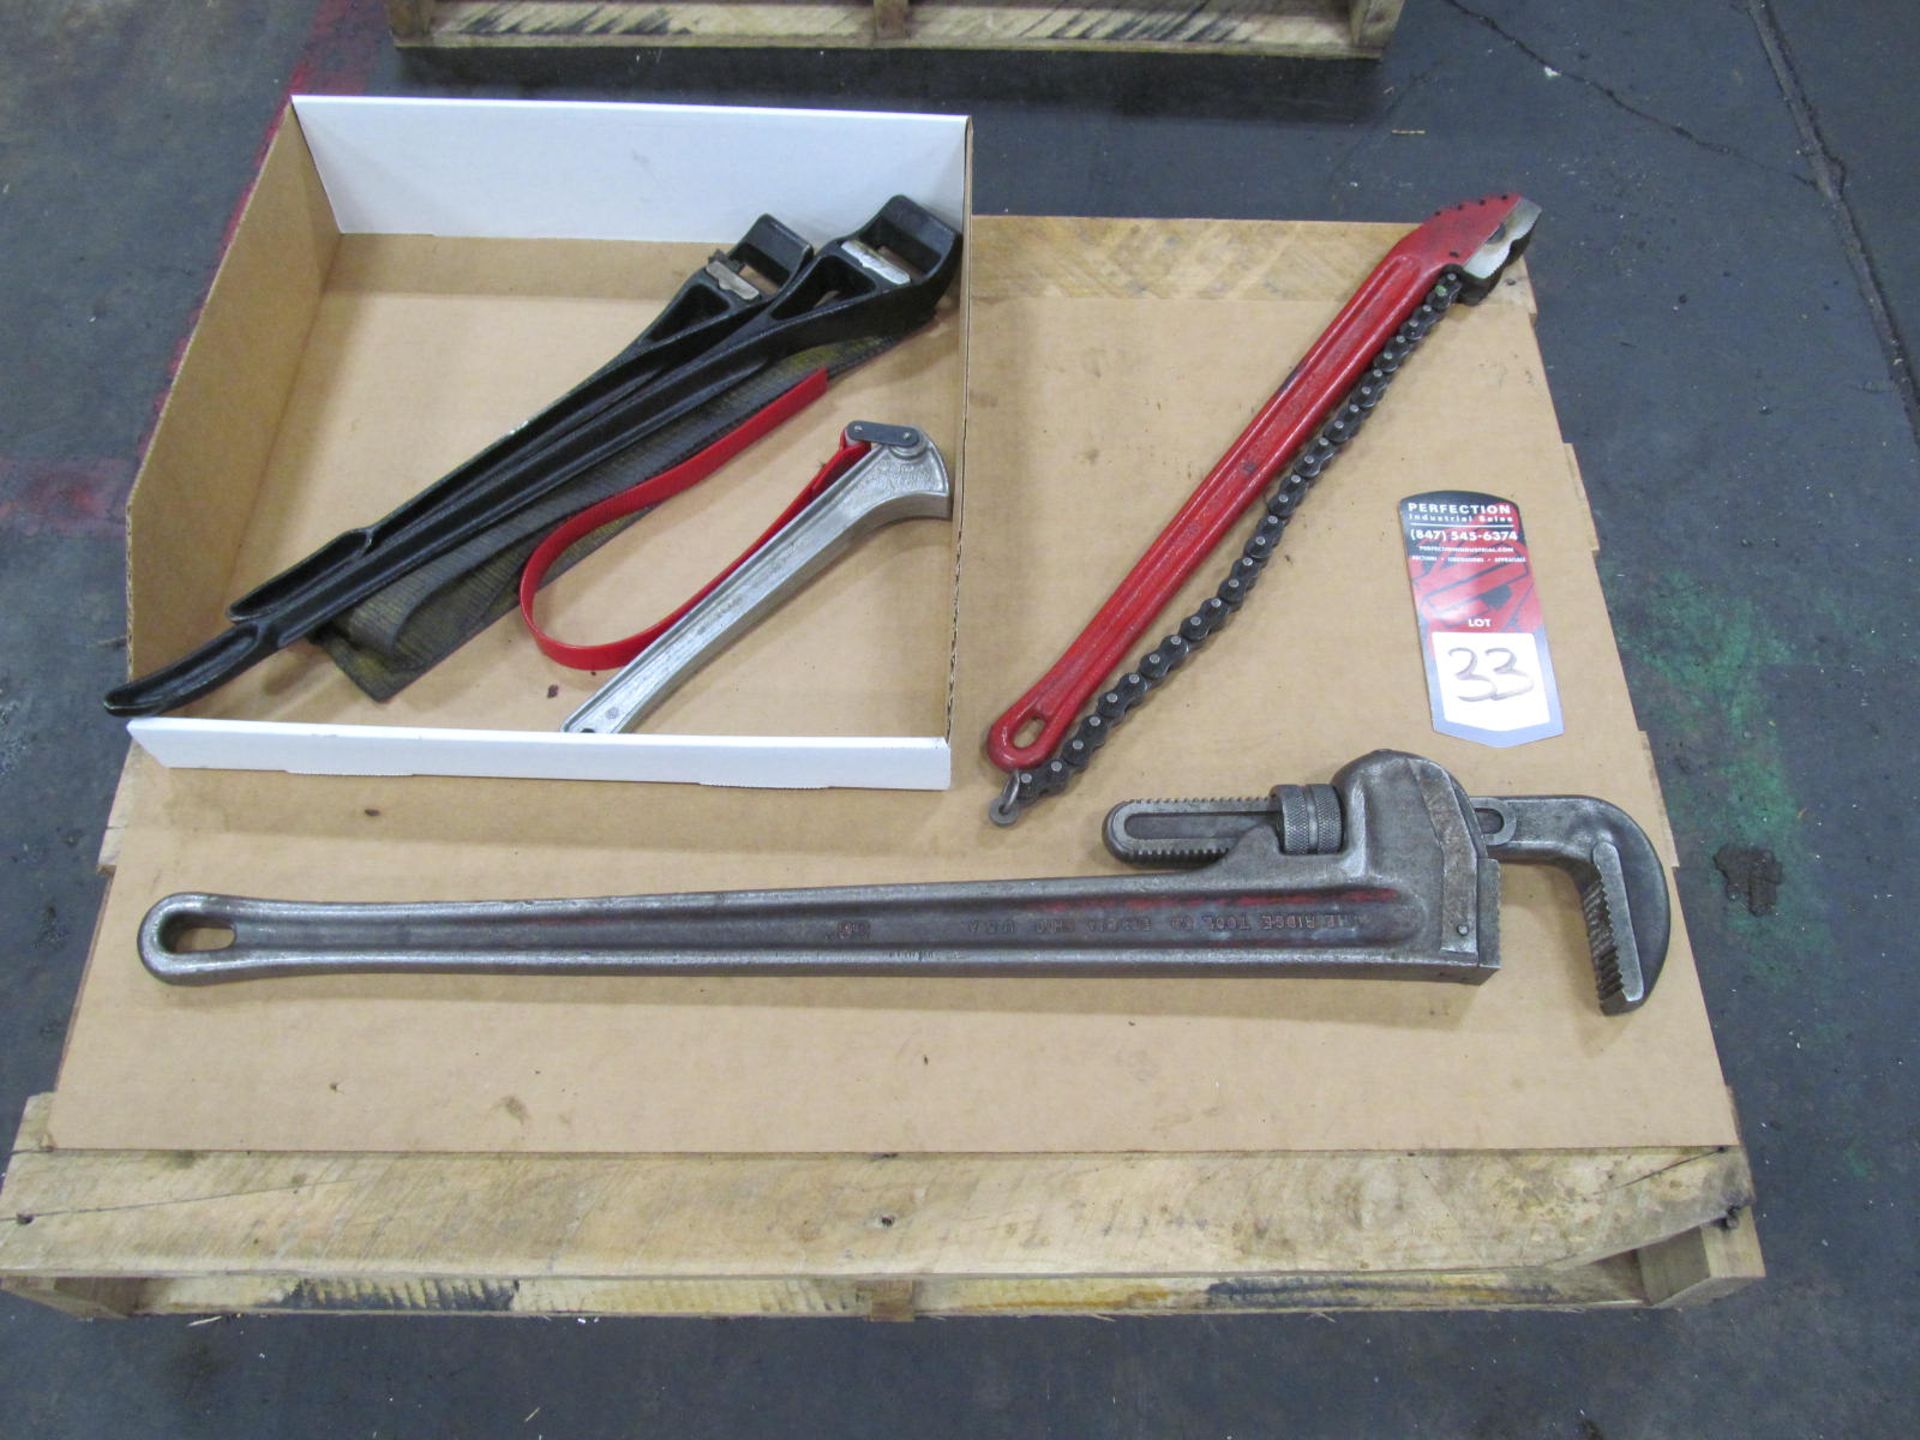 36" Ridged Pipe Wrench w/ 3" Reed Chain Wrench & Assorted Strap Wrenches